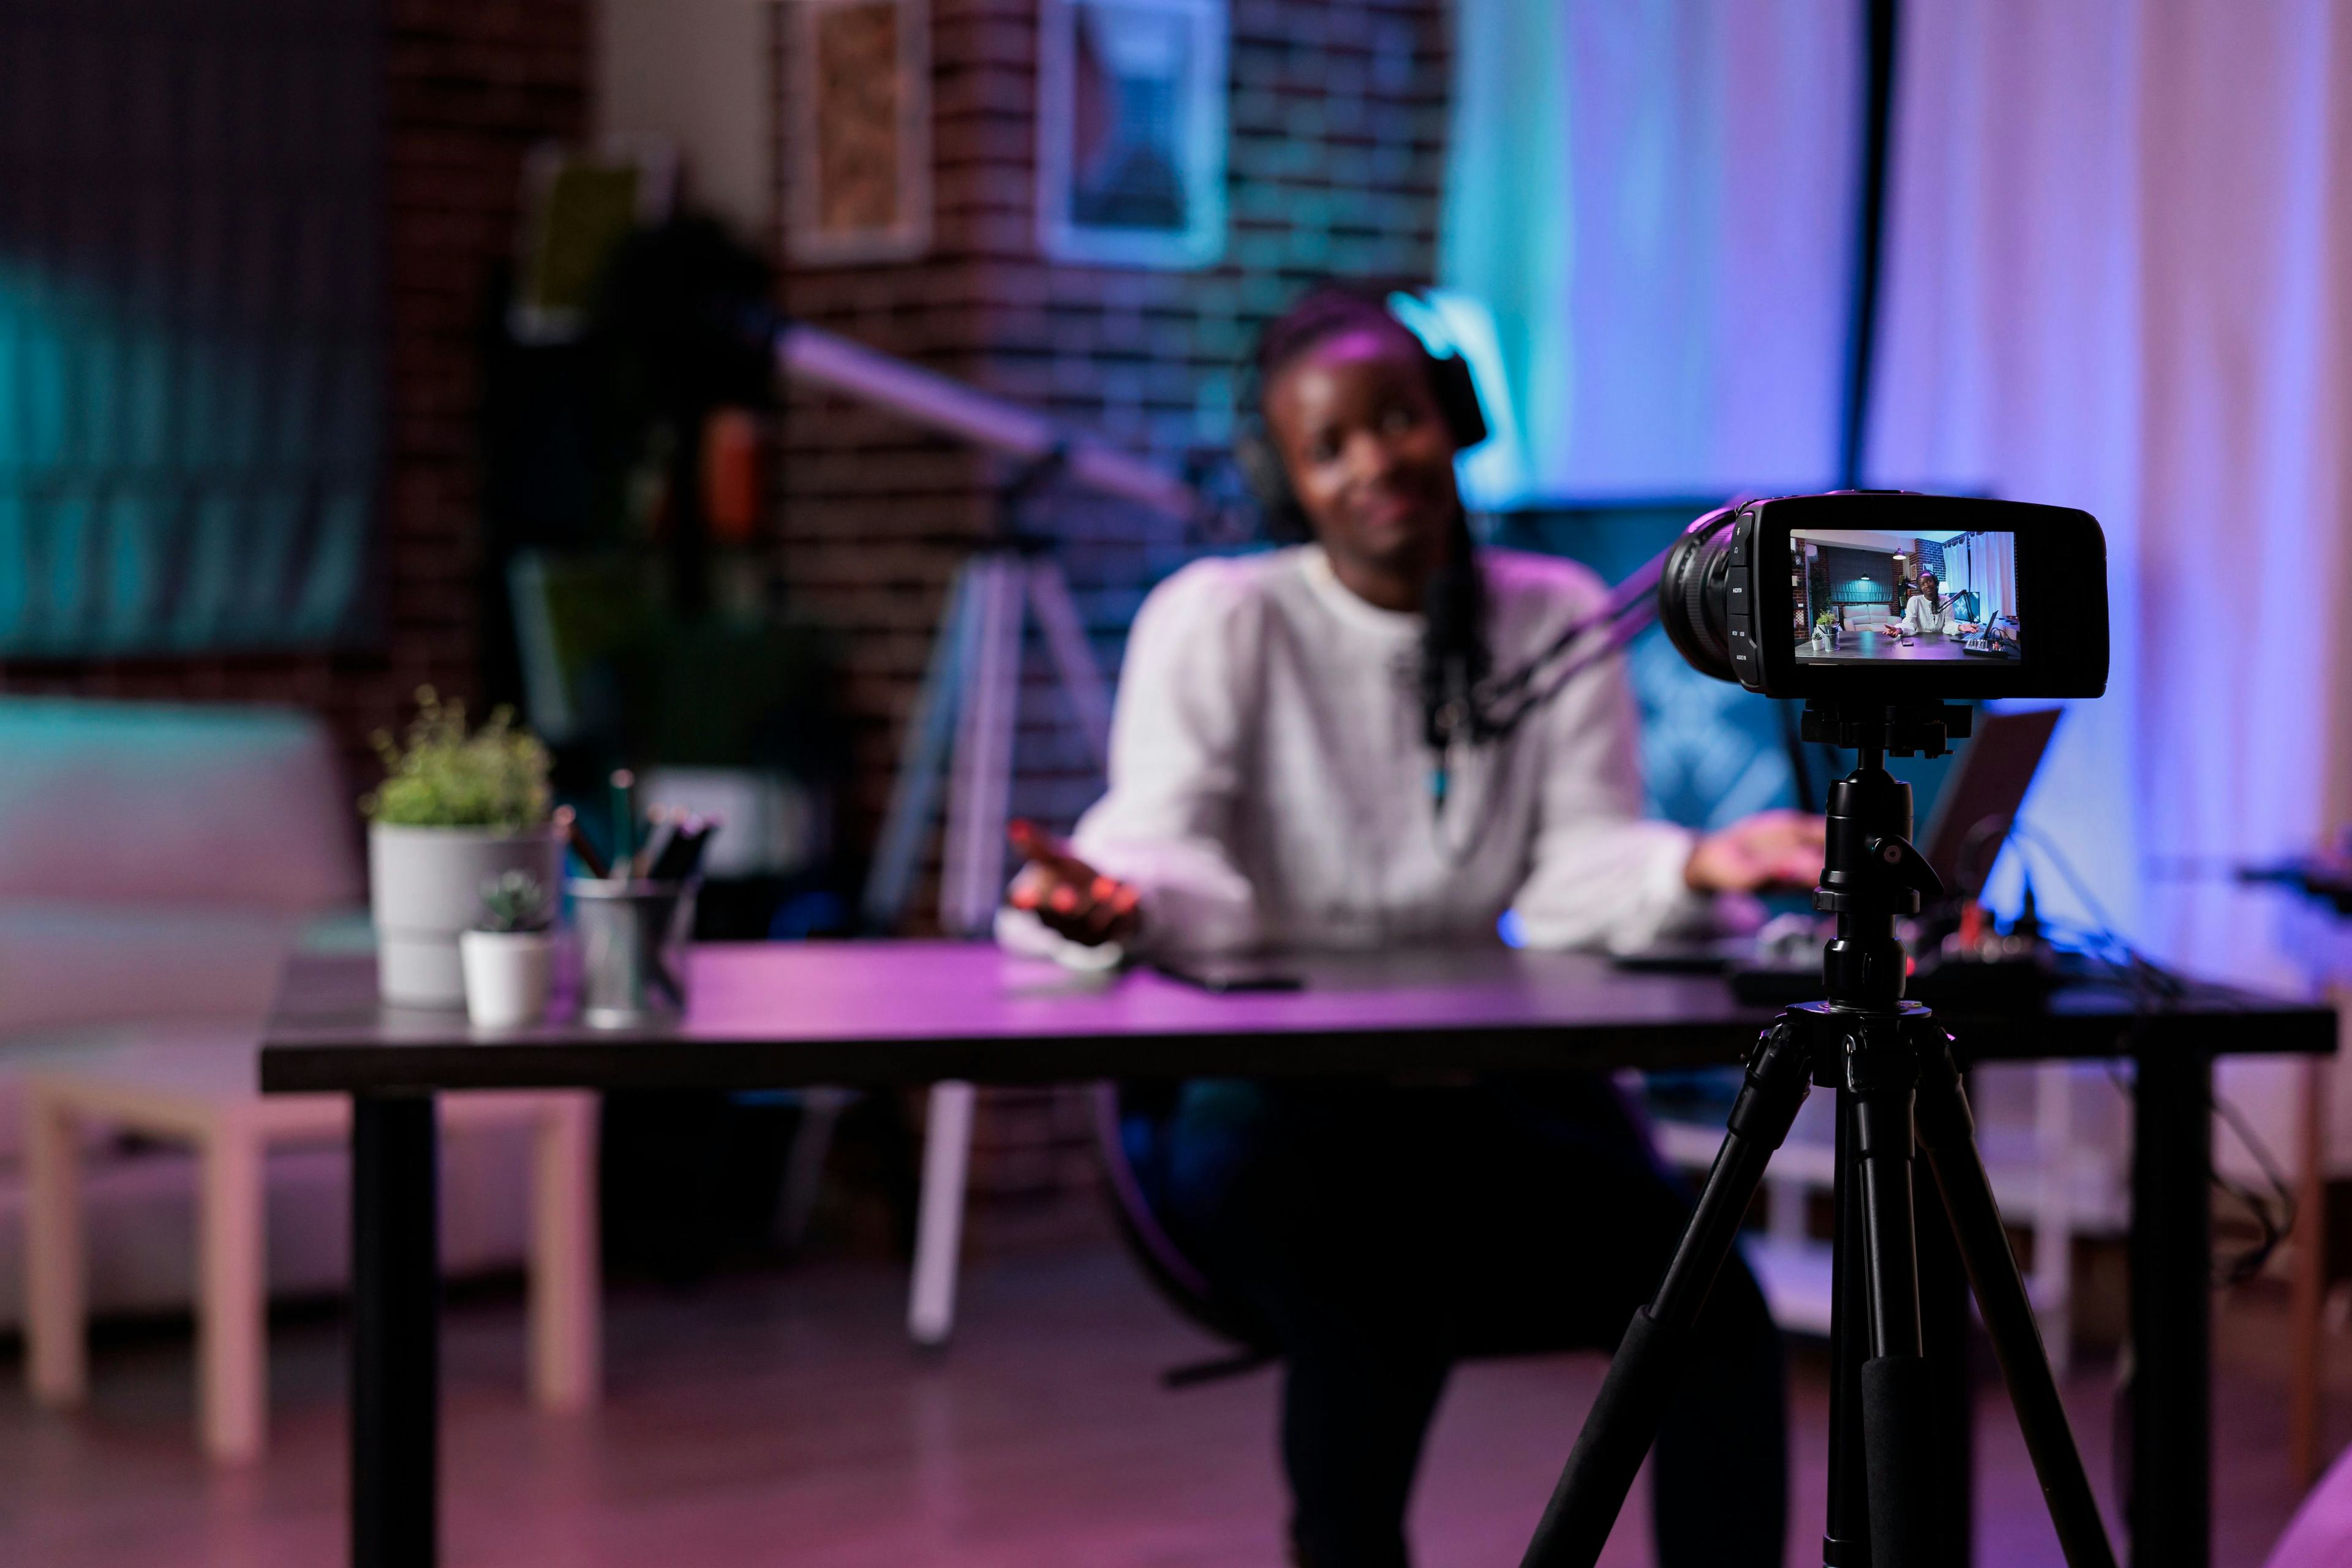 Female content creator sitting at table with camera on tripod in front of her